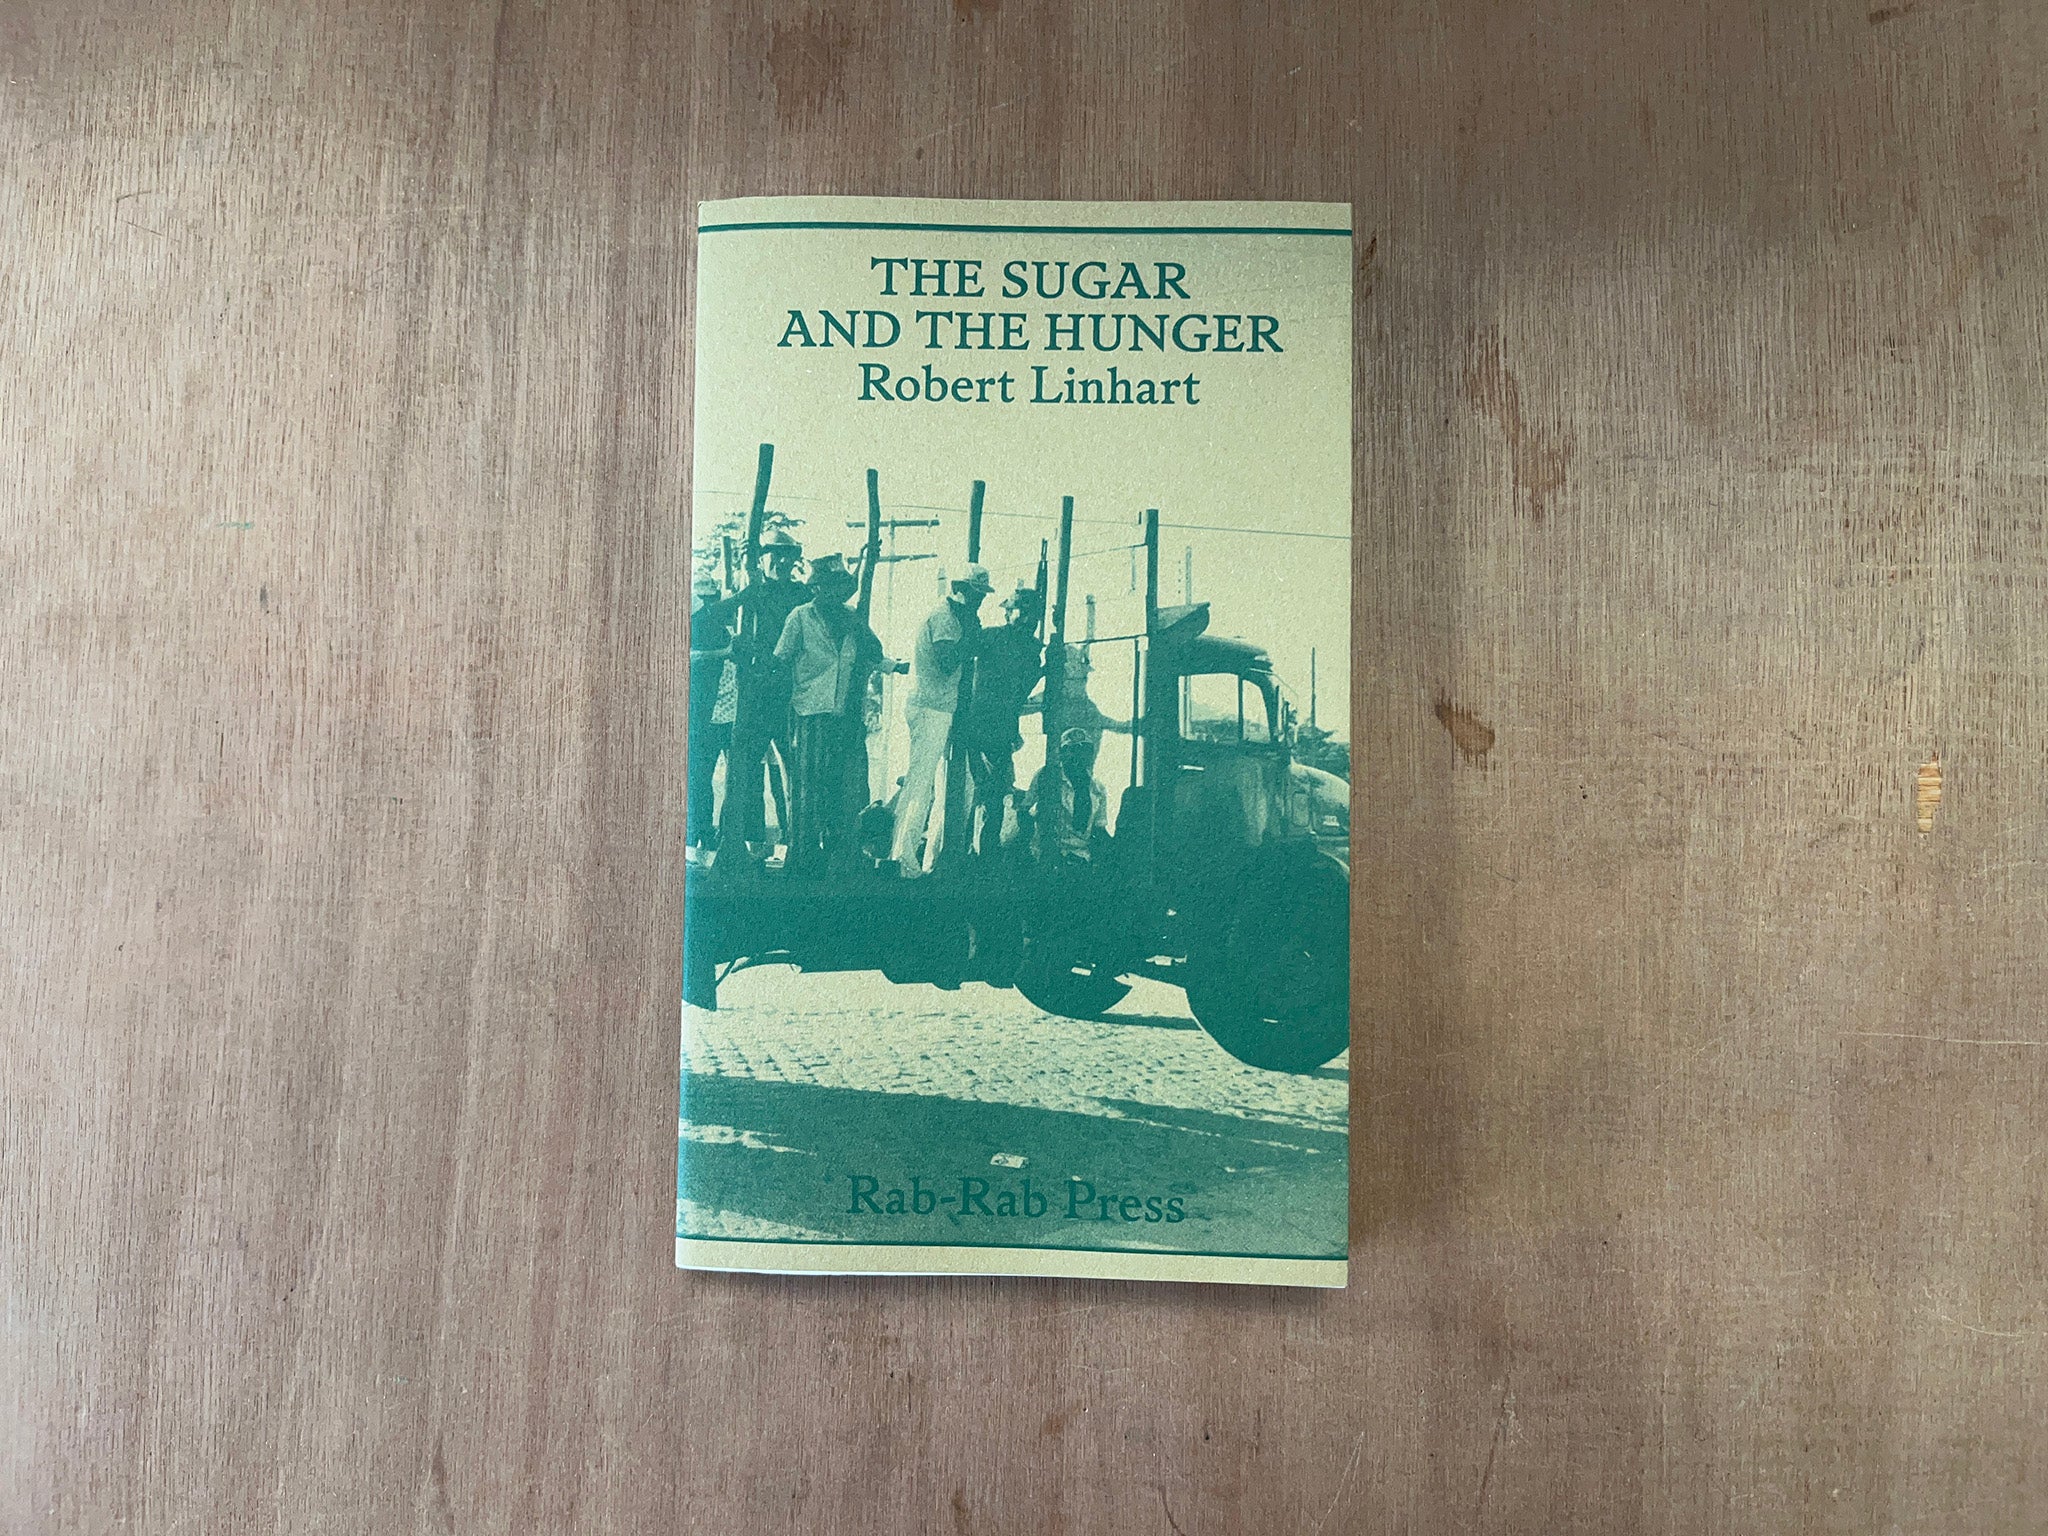 THE SUGAR AND THE HUNGER by Robert Linhart